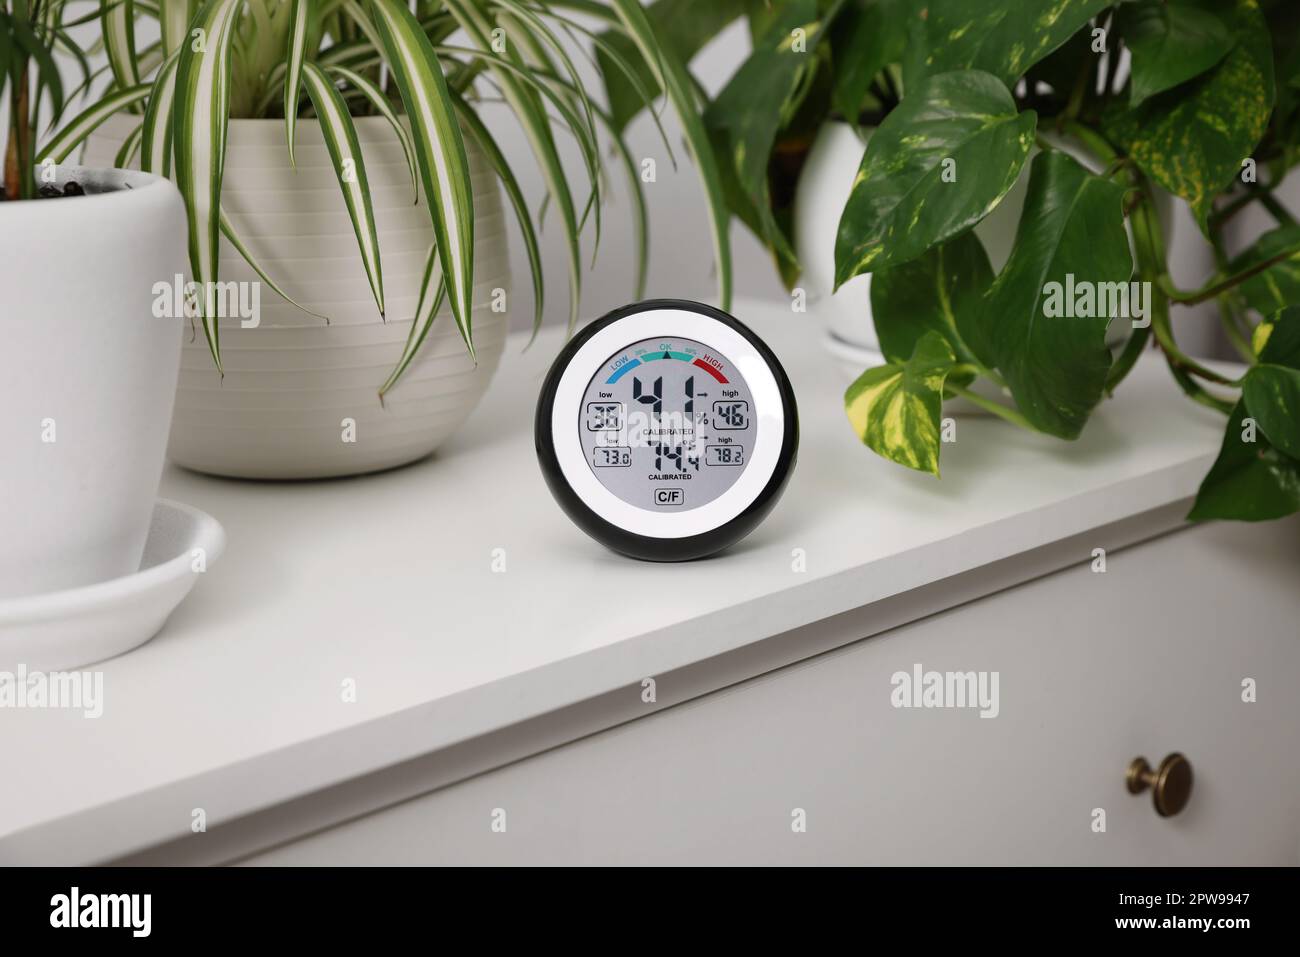 https://c8.alamy.com/comp/2PW9947/digital-hygrometer-with-thermometer-and-plants-on-chest-of-drawers-2PW9947.jpg